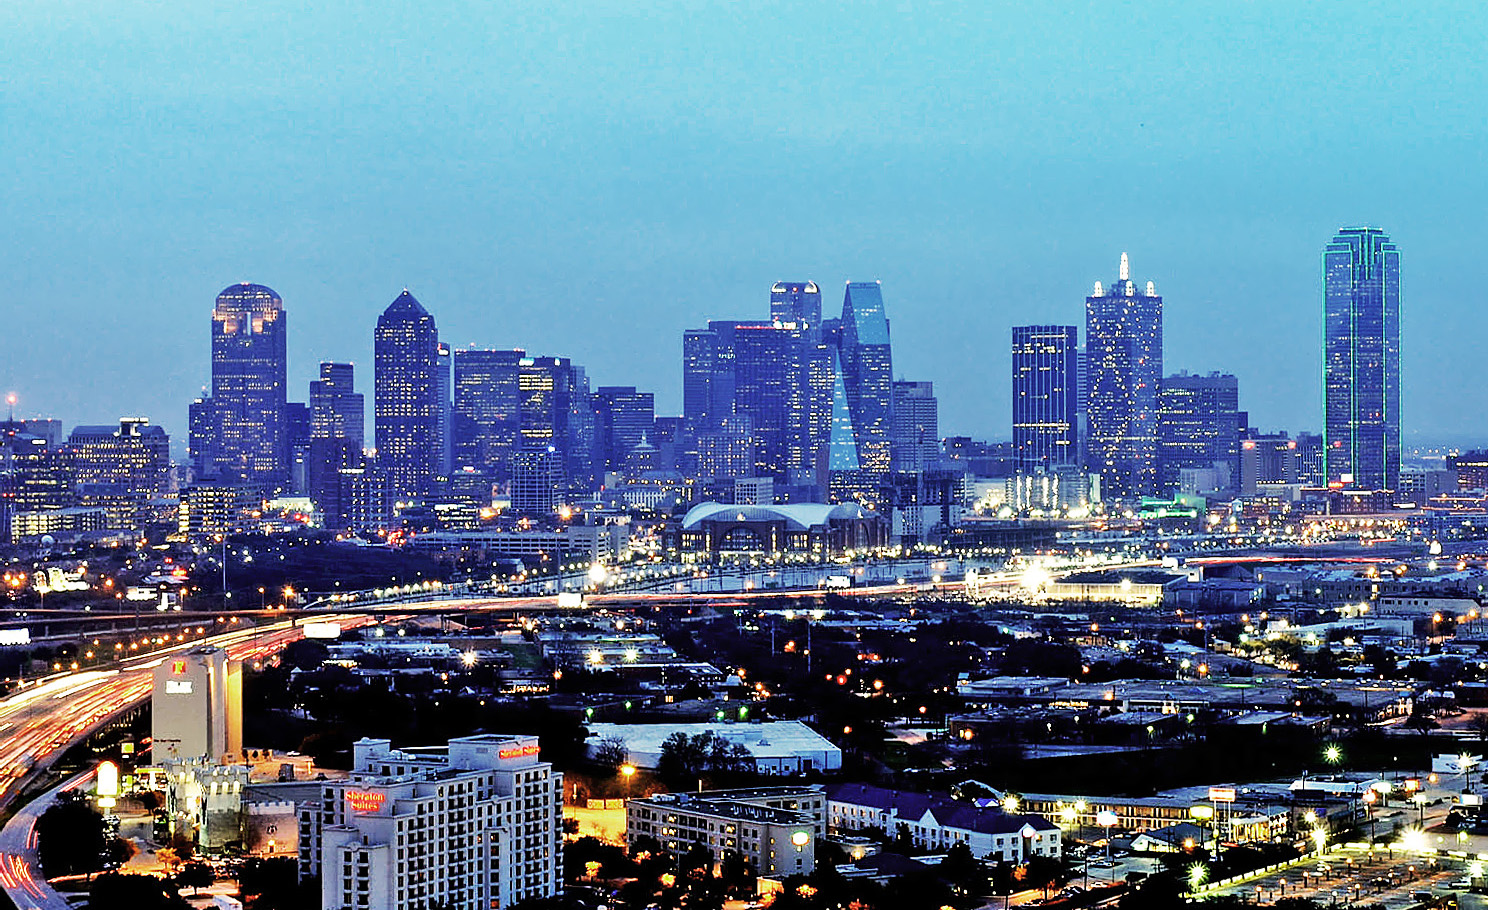 Growth in Dallas: Where is the Ceiling?